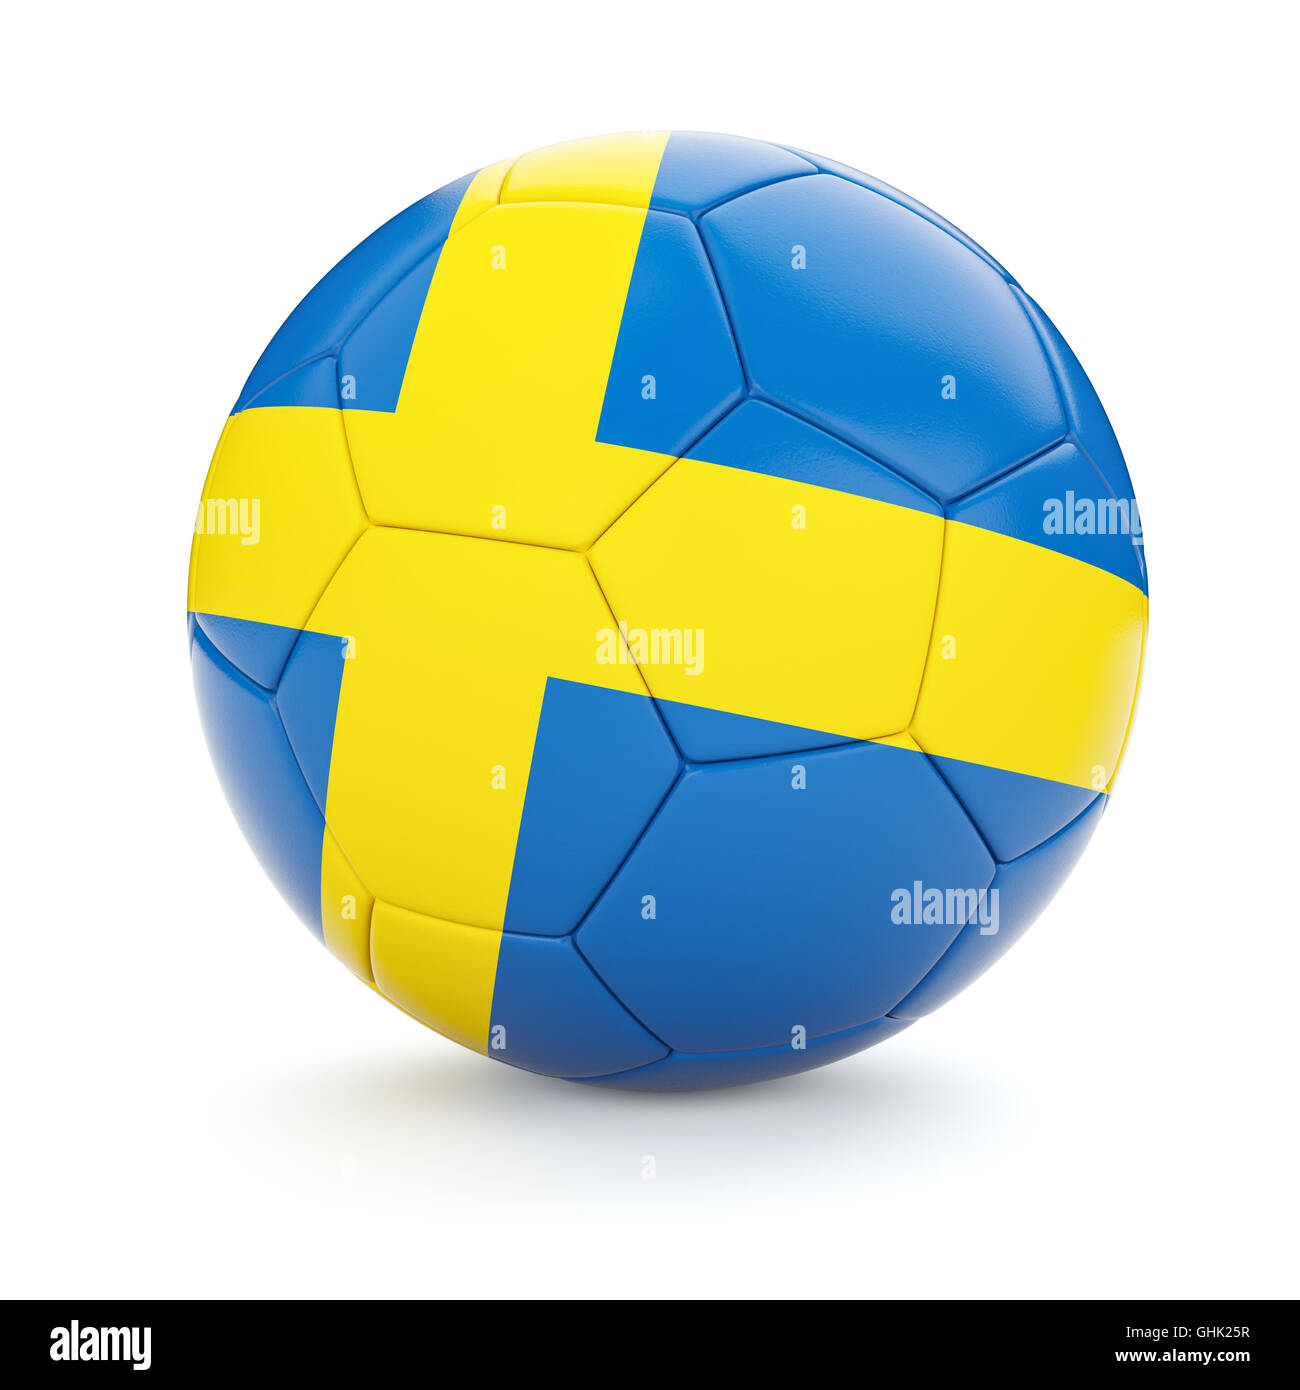 Soccer football ball with Sweden flag Stock Photo